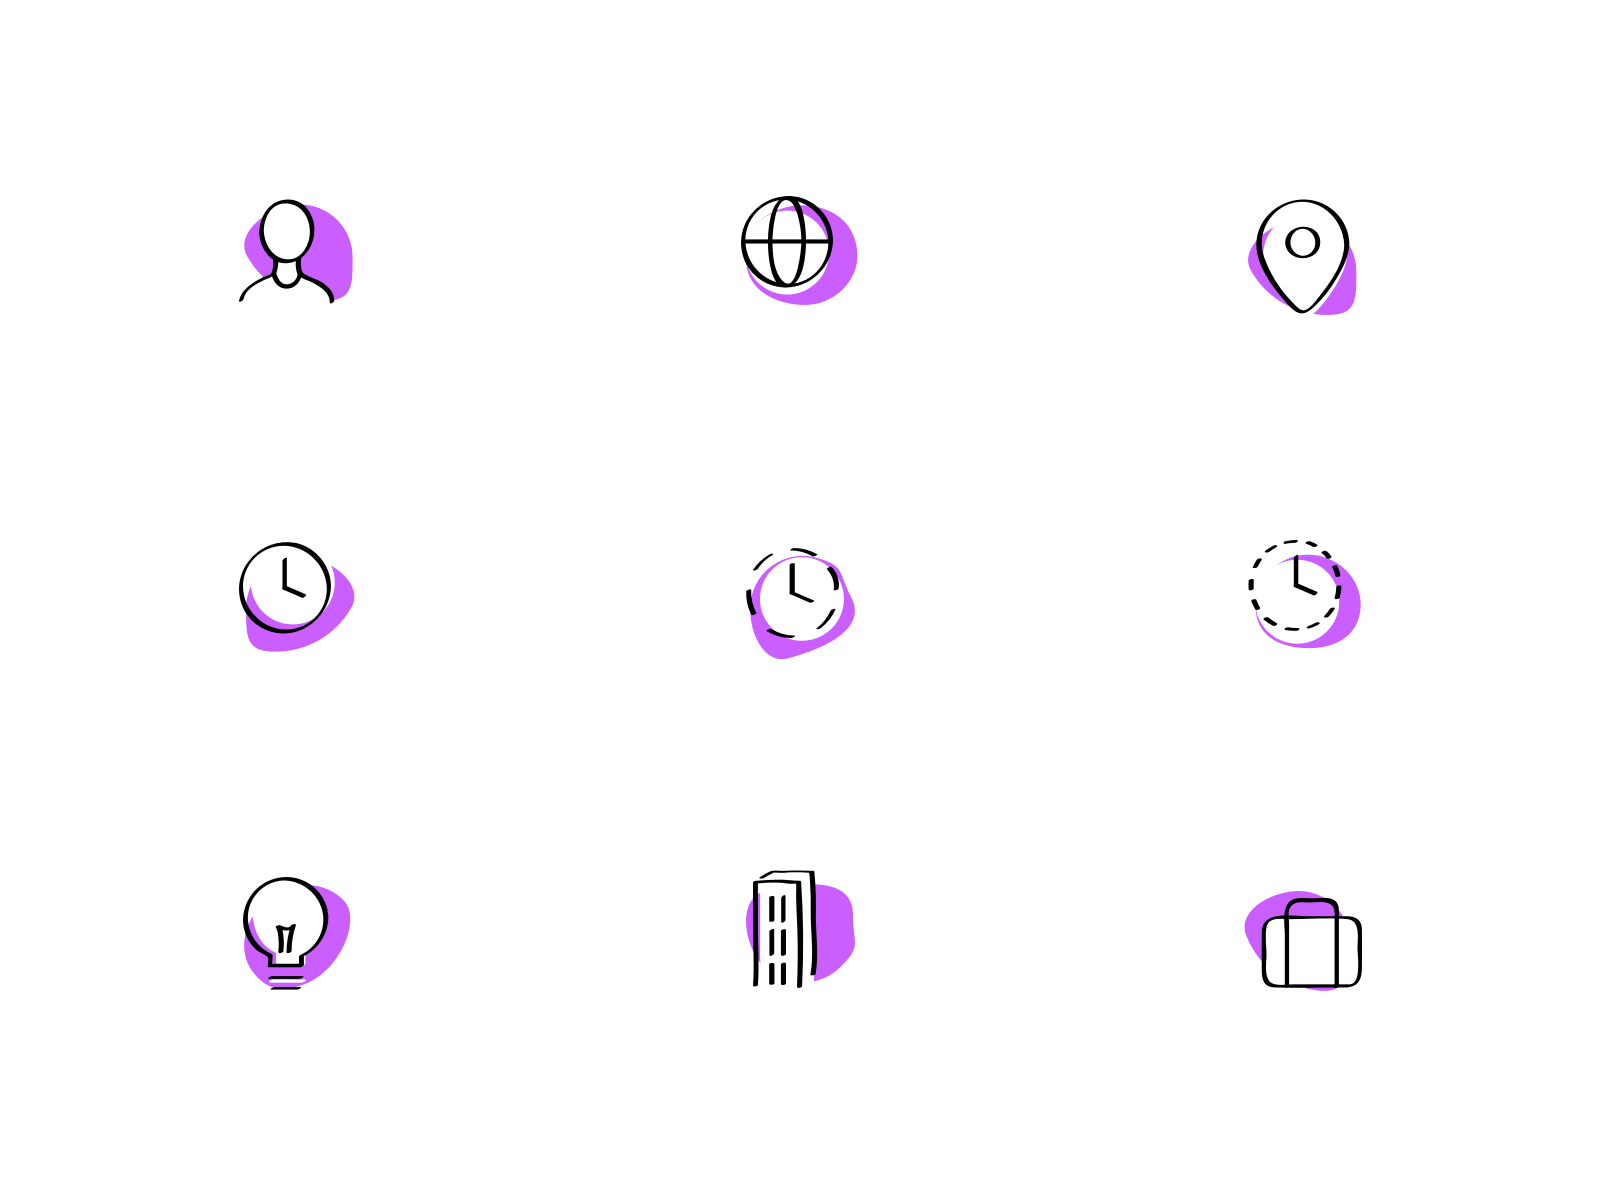 icons for a freelance activity 🤖 freelance icons lightbulb part time picto pictograms profil purple remote work world